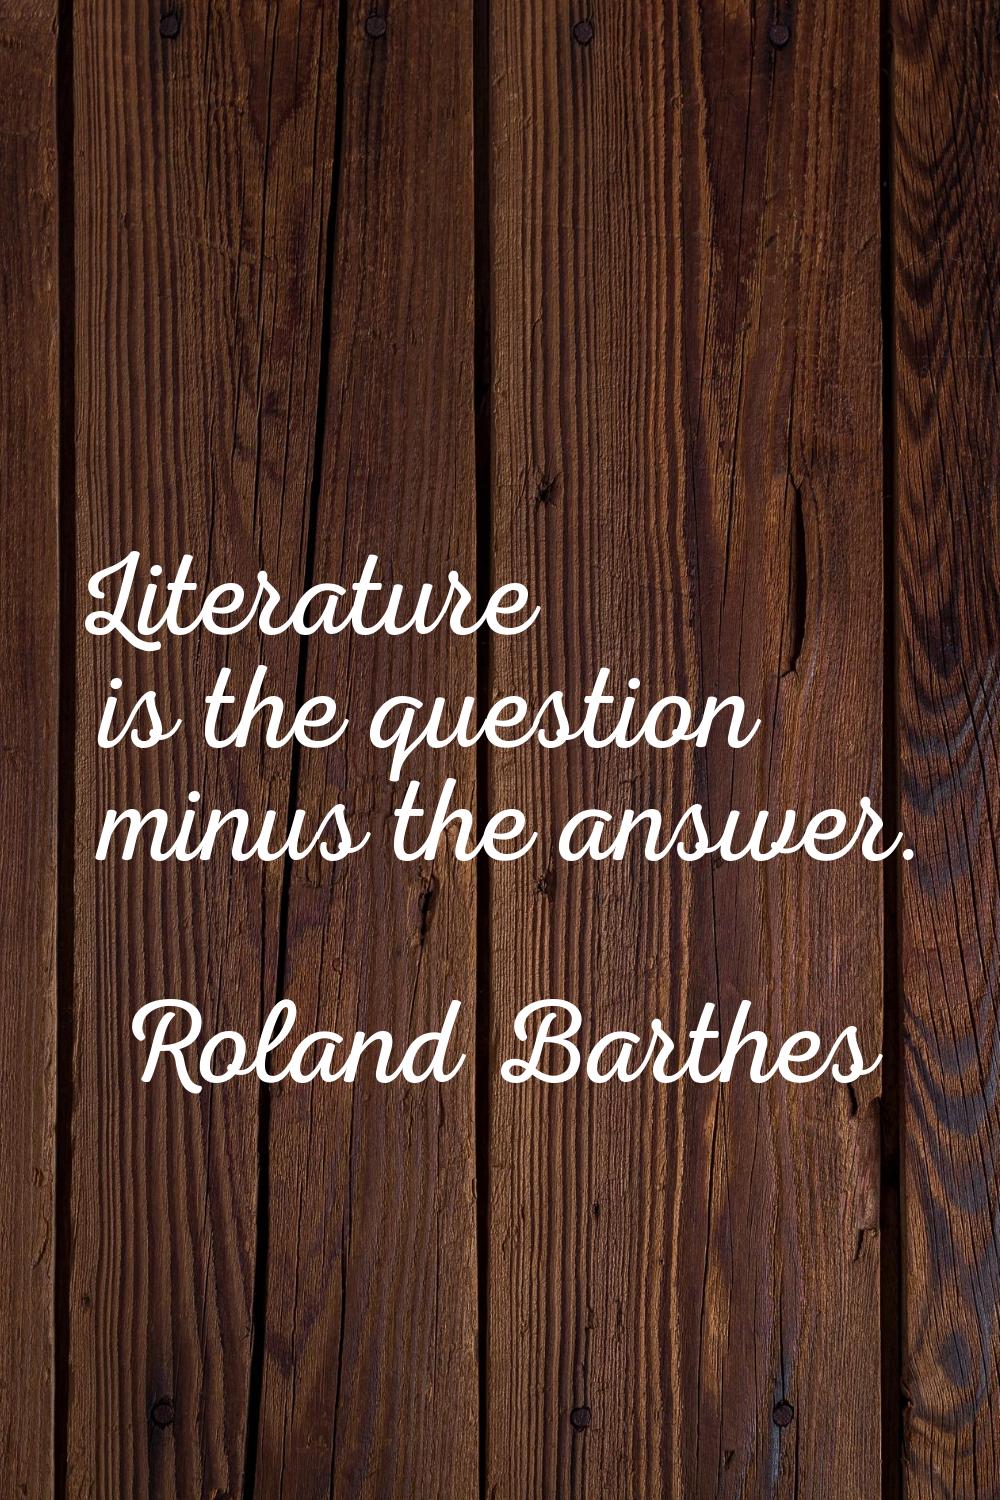 Literature is the question minus the answer.